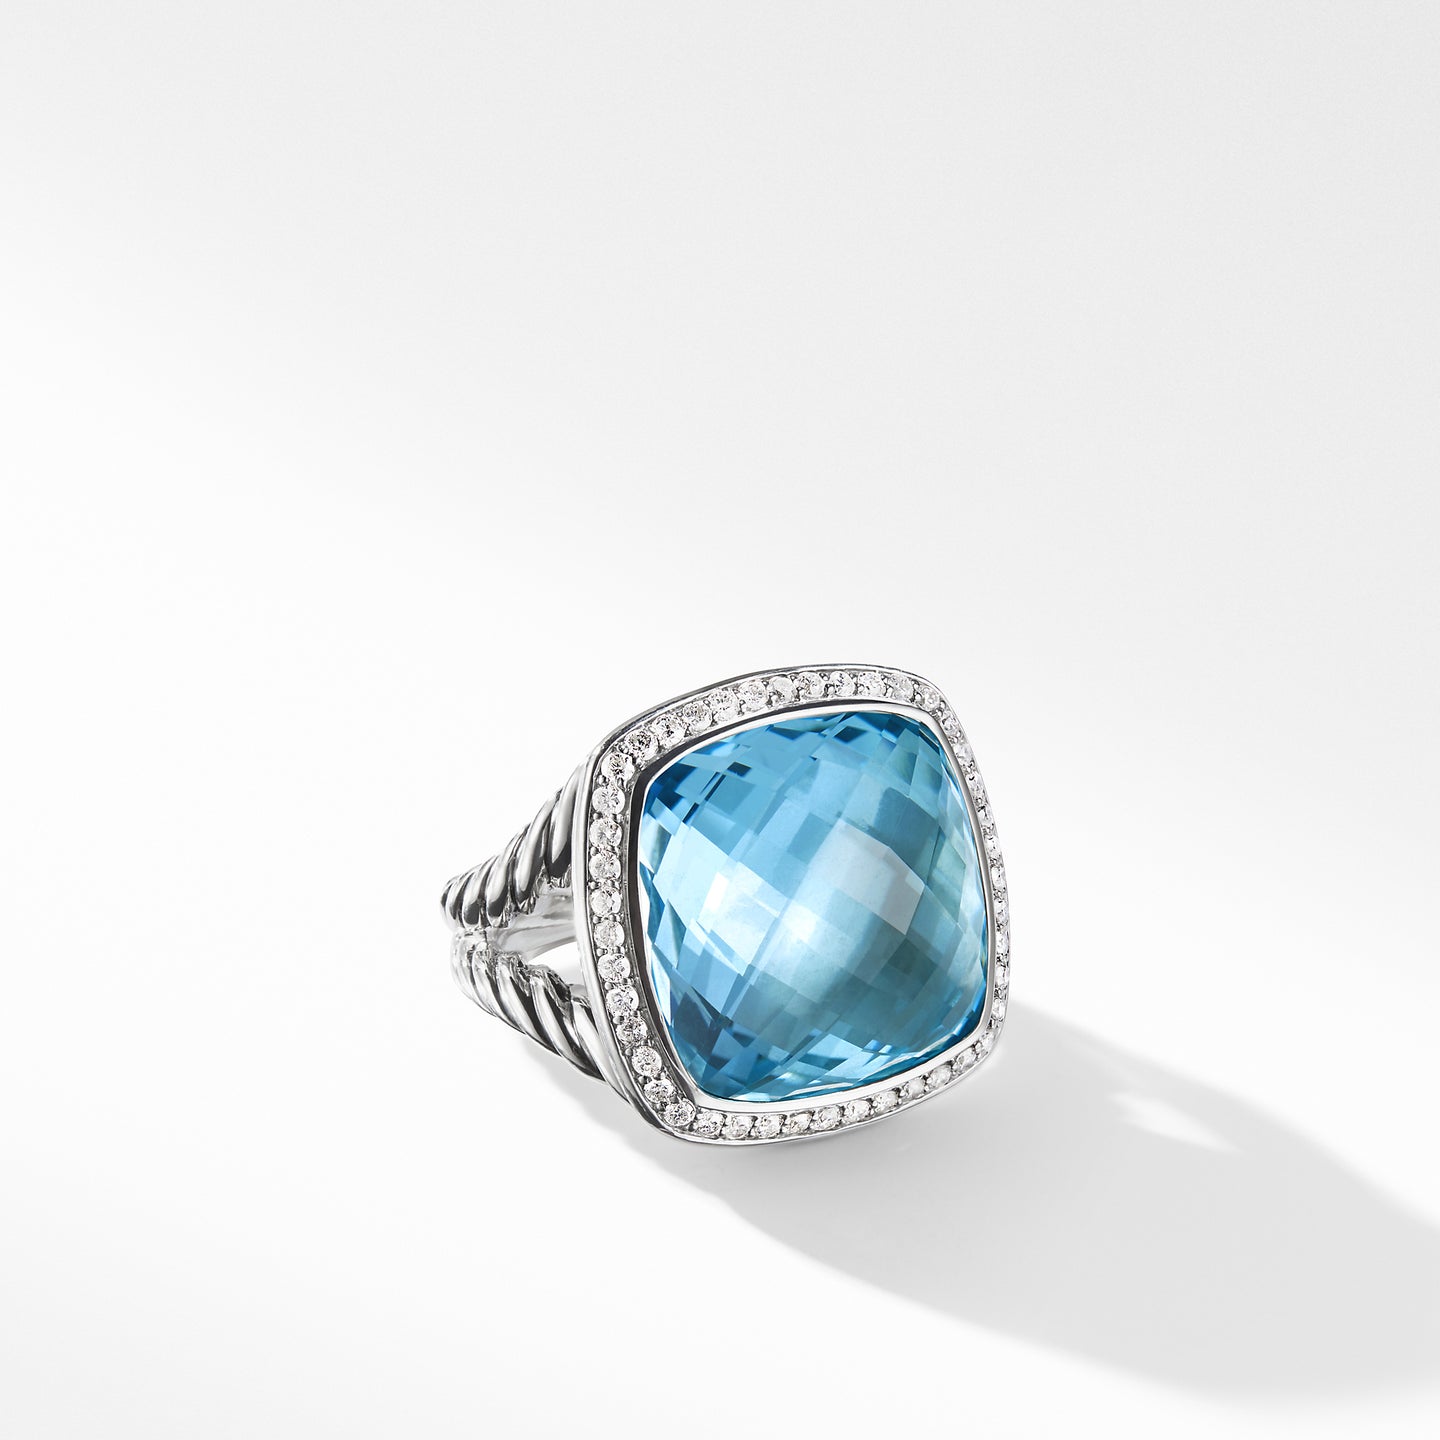 Ring with Blue Topaz and Diamonds, Size 7